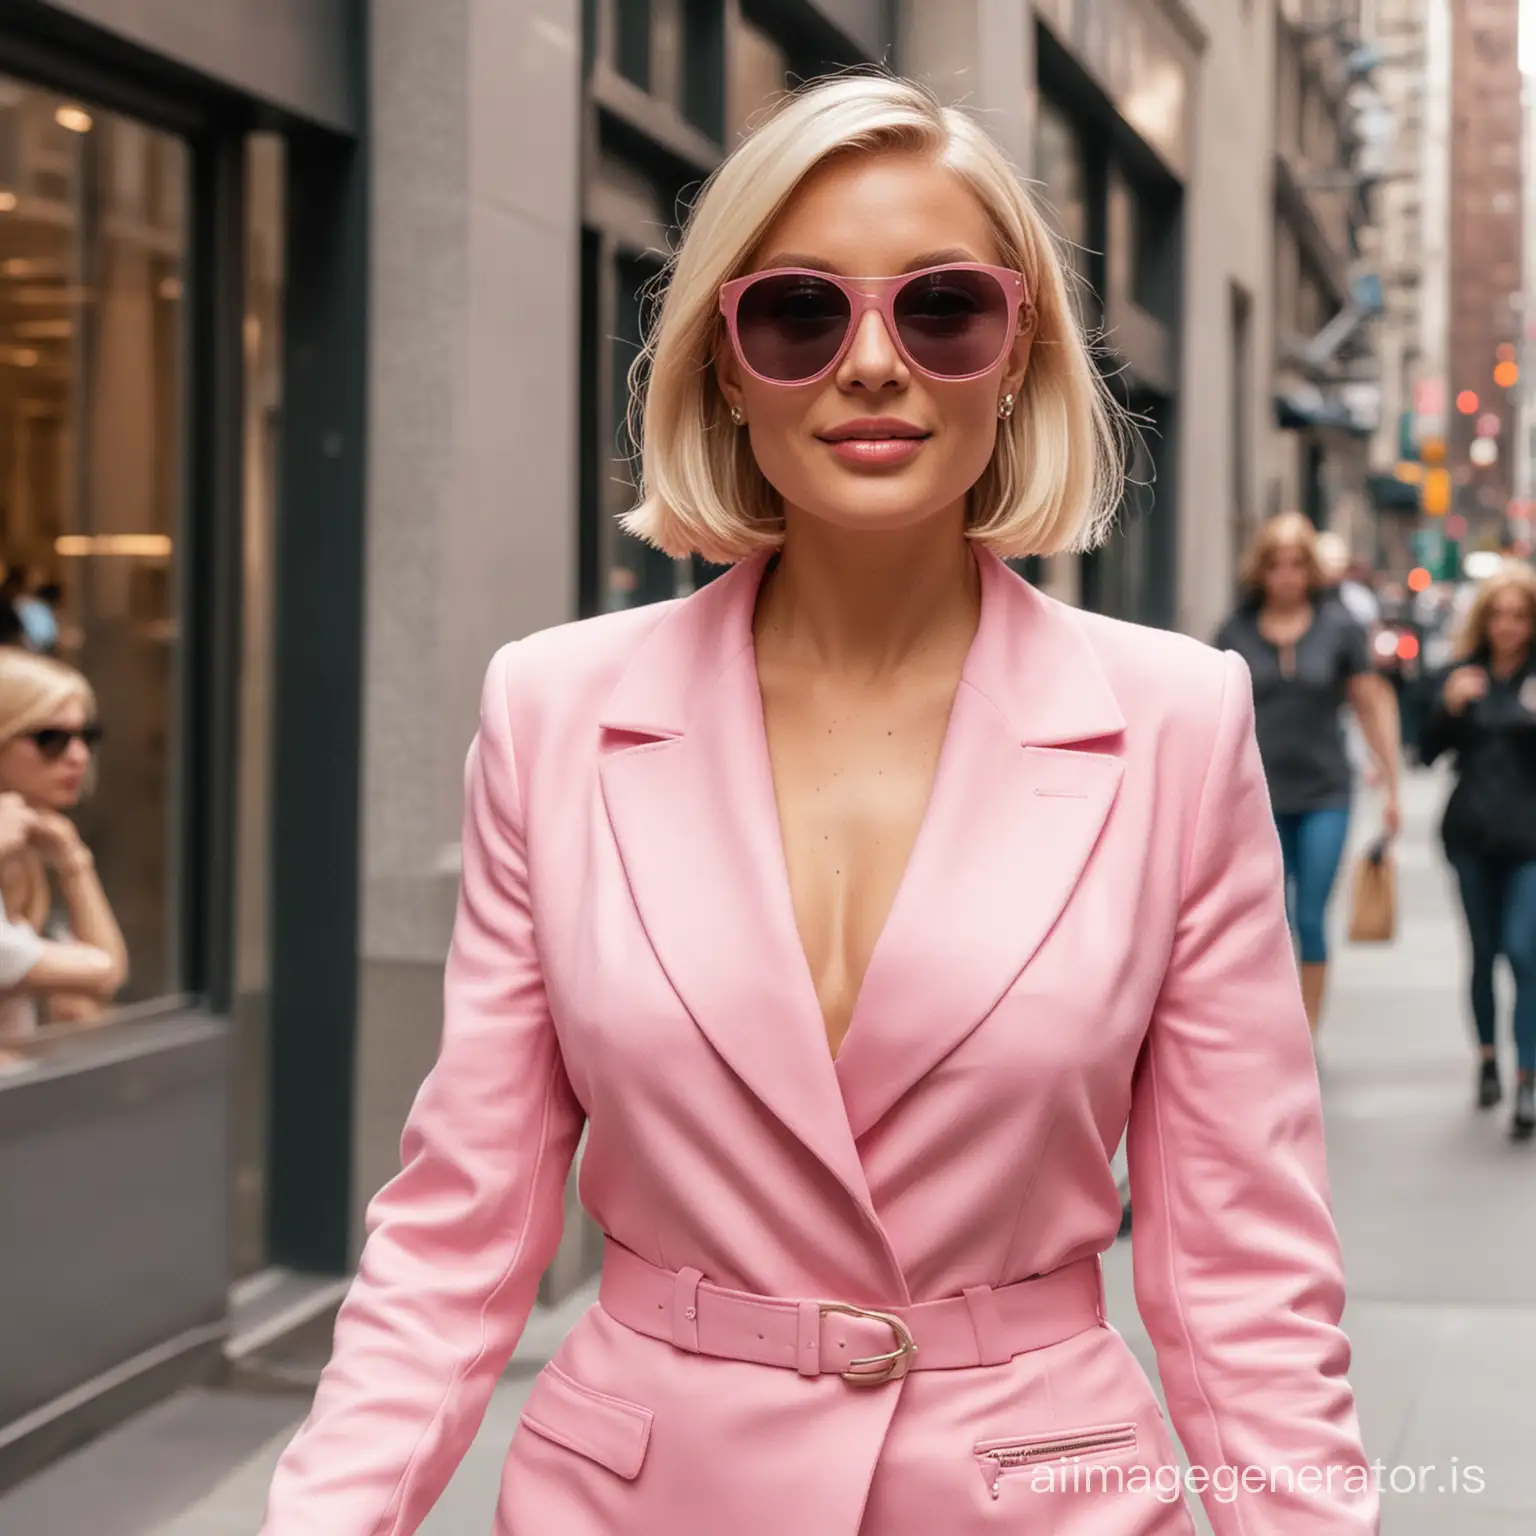 Blonde-BobCut-Woman-in-Pink-Exiting-NYC-Office-Amid-Paparazzi-Frenzy-with-Sunglasses